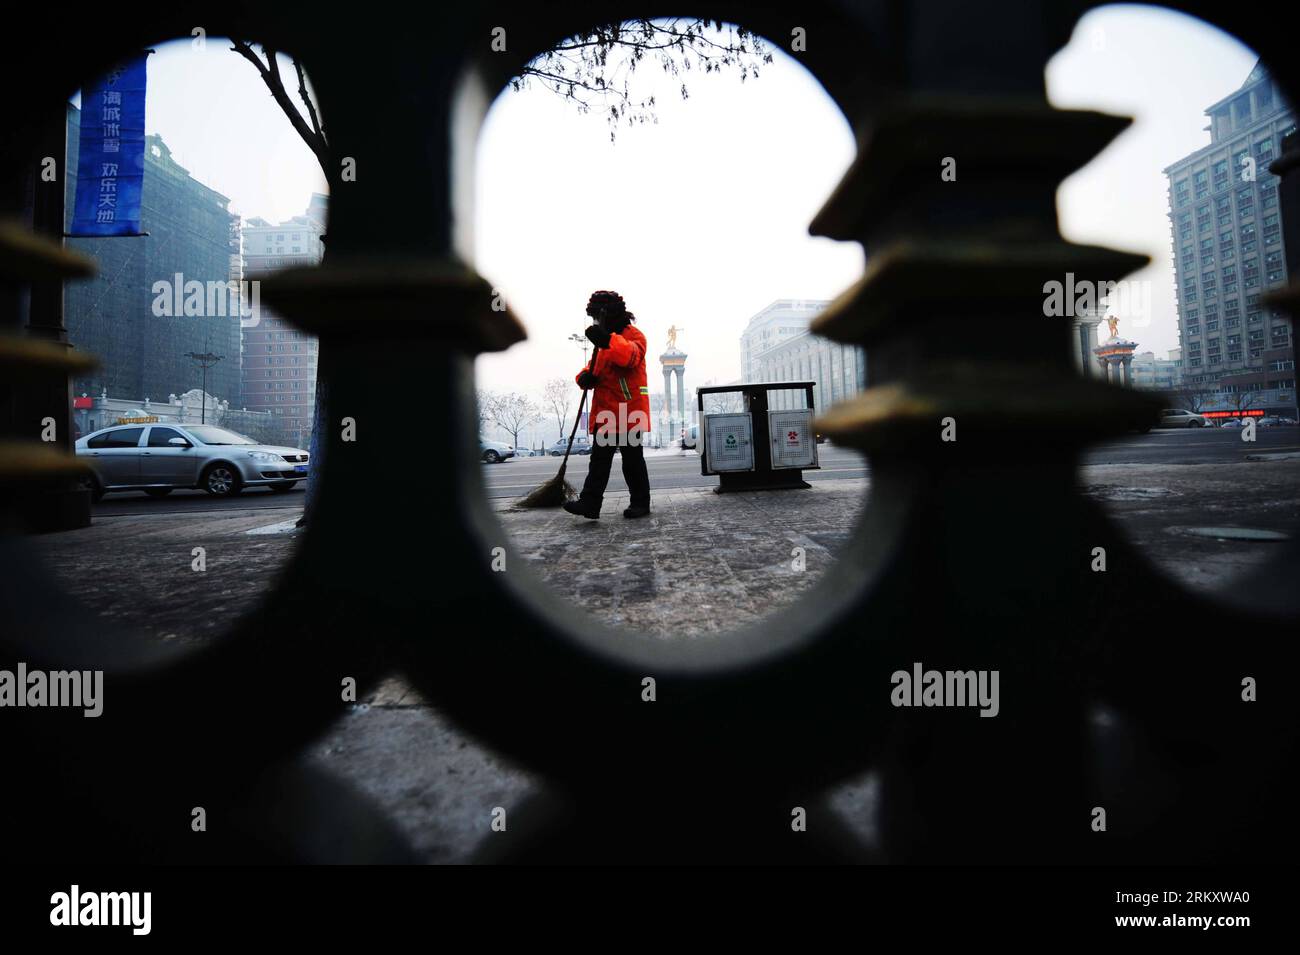 Bildnummer: 59095368  Datum: 16.01.2013  Copyright: imago/Xinhua HARBIN, Jan. 16, 2013 (Xinhua) -- Sanitation worker Yang Weixia works on a road in Harbin, capital of northeast China s Heilongjiang Province, Jan. 16, 2013. Yang Weixia, 48, is an ordinary sanitation worker living in Harbin, a city known for its bitterly cold winters and often called the Ice City. For 32 years, Yang has never stopped sweating away at her work, though she often gets up at three o clock every morning and will not go back home until 9 in the evening in the cold winter. There are more than 10,000 sanitation workers Stock Photo